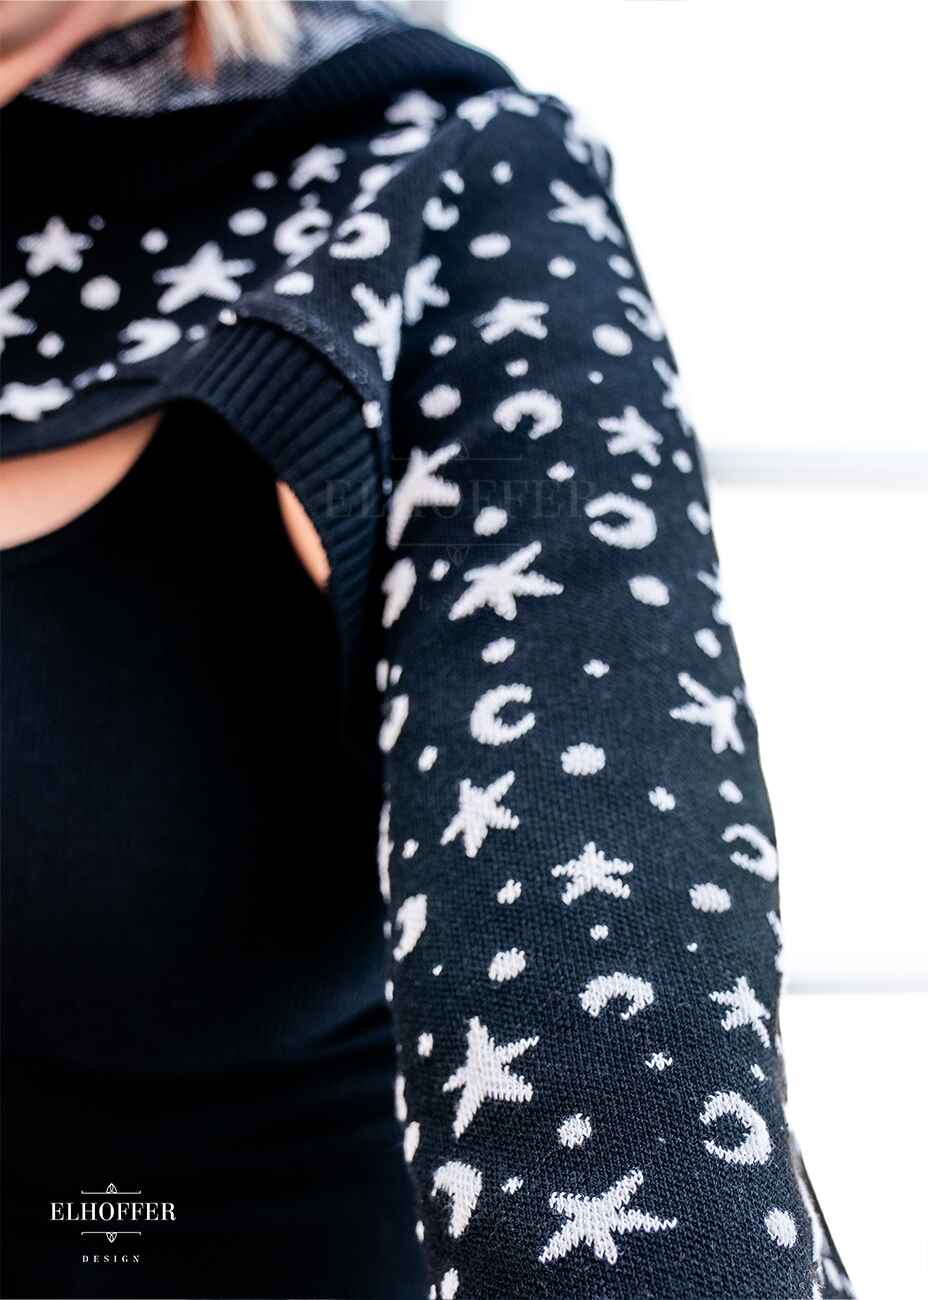 A close up of the white star and moon pattern.